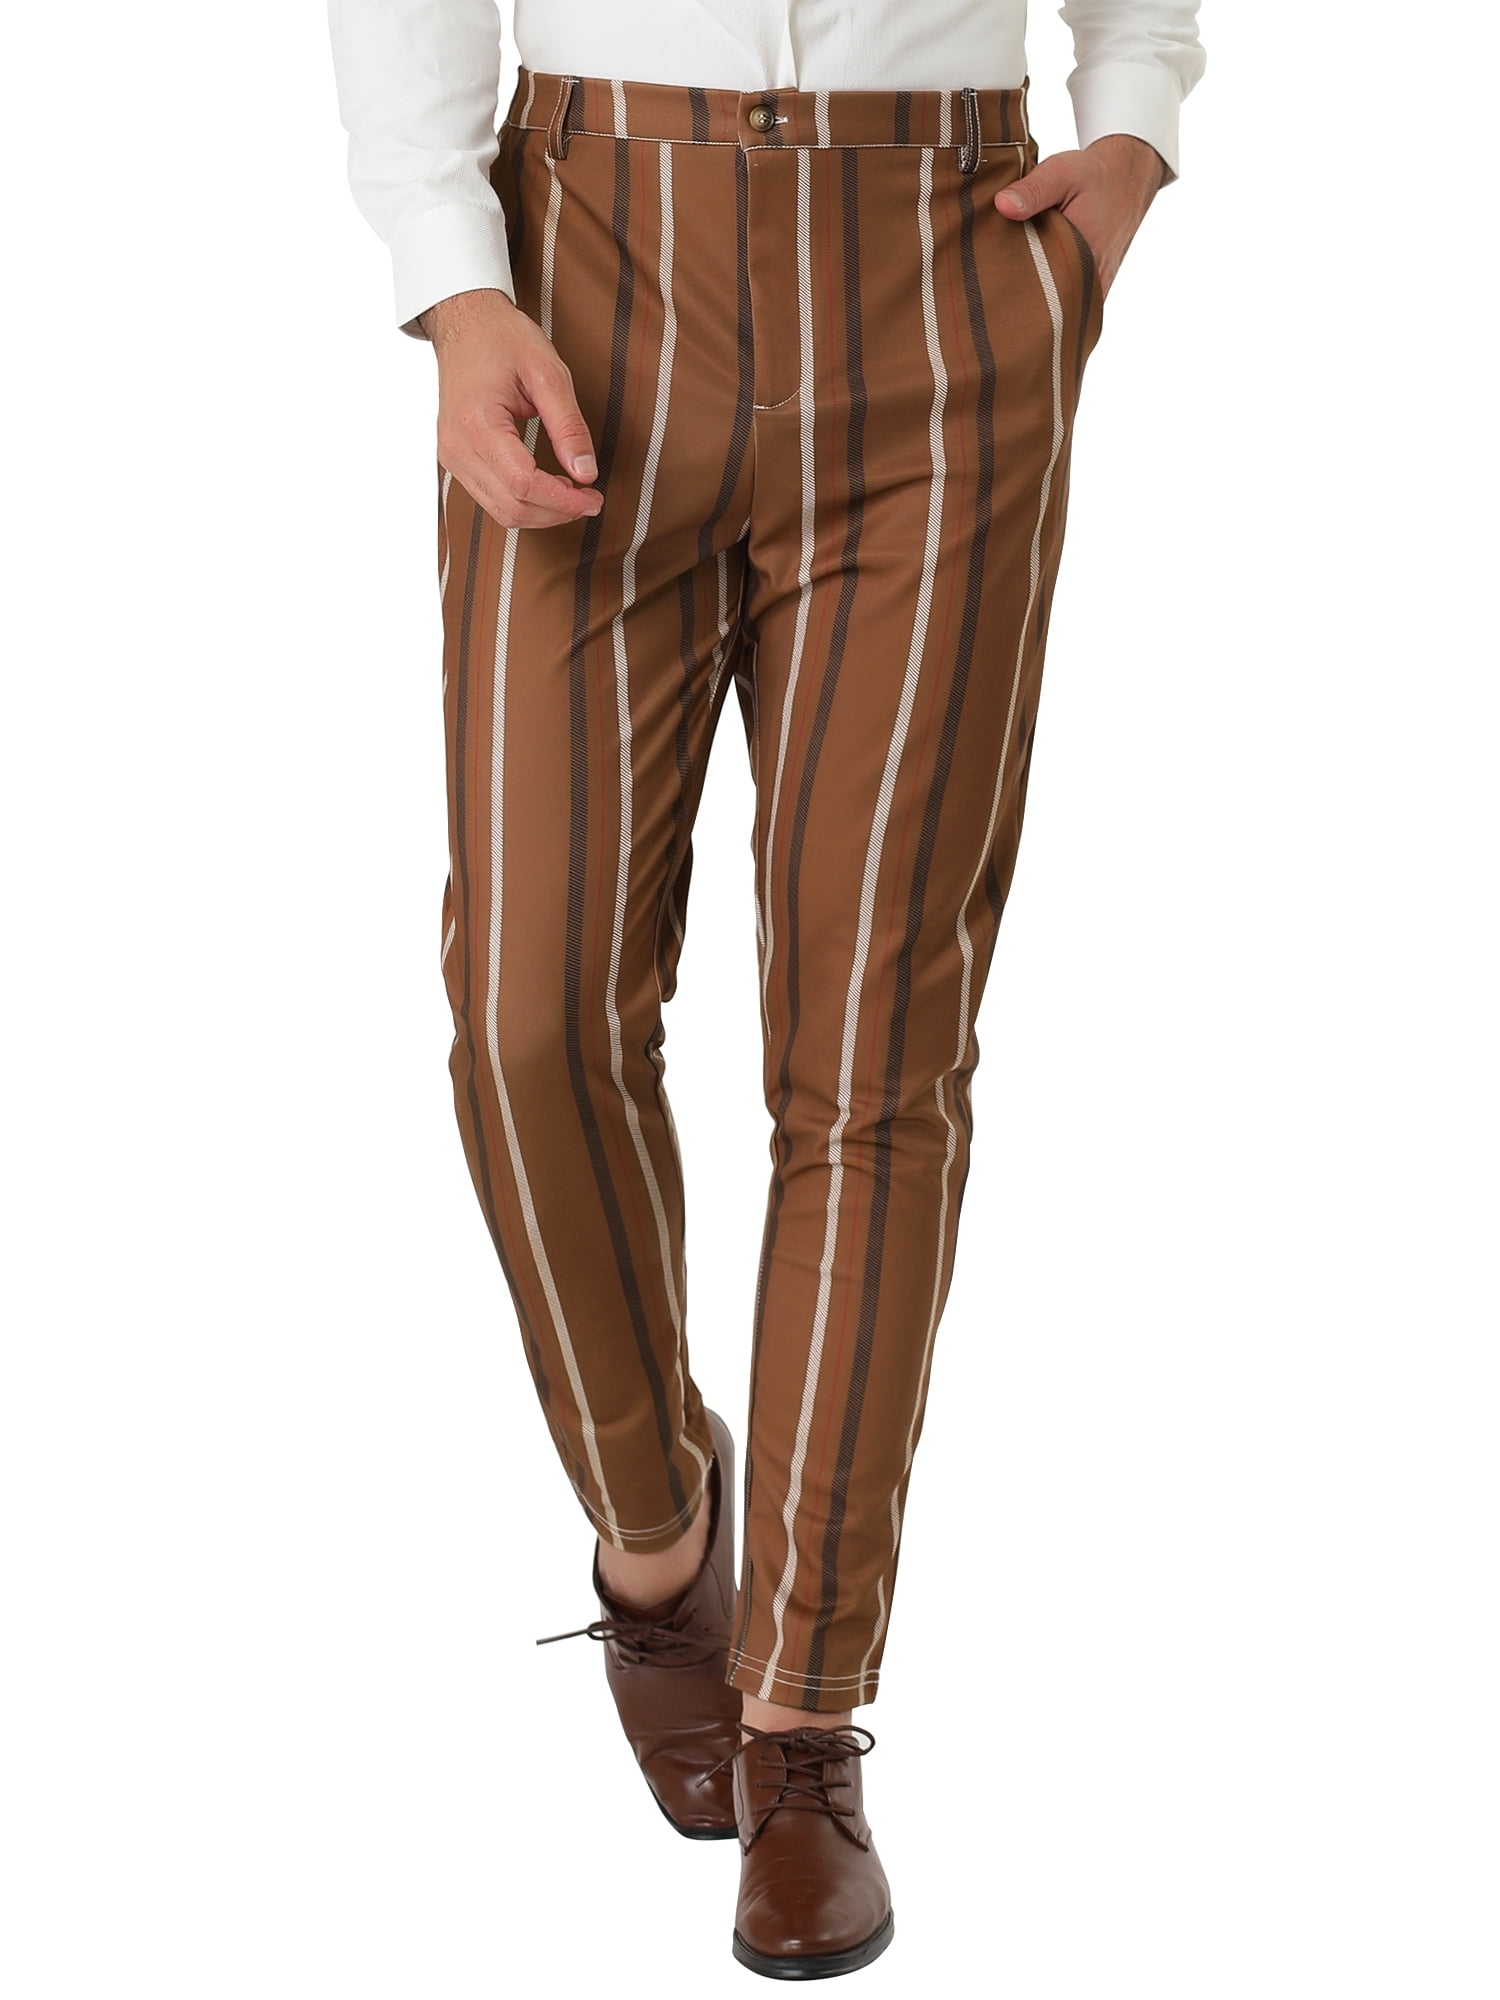 Genuine Ceremonial Bandsman Dress Trousers Silver Braided Stripe All Sizes 